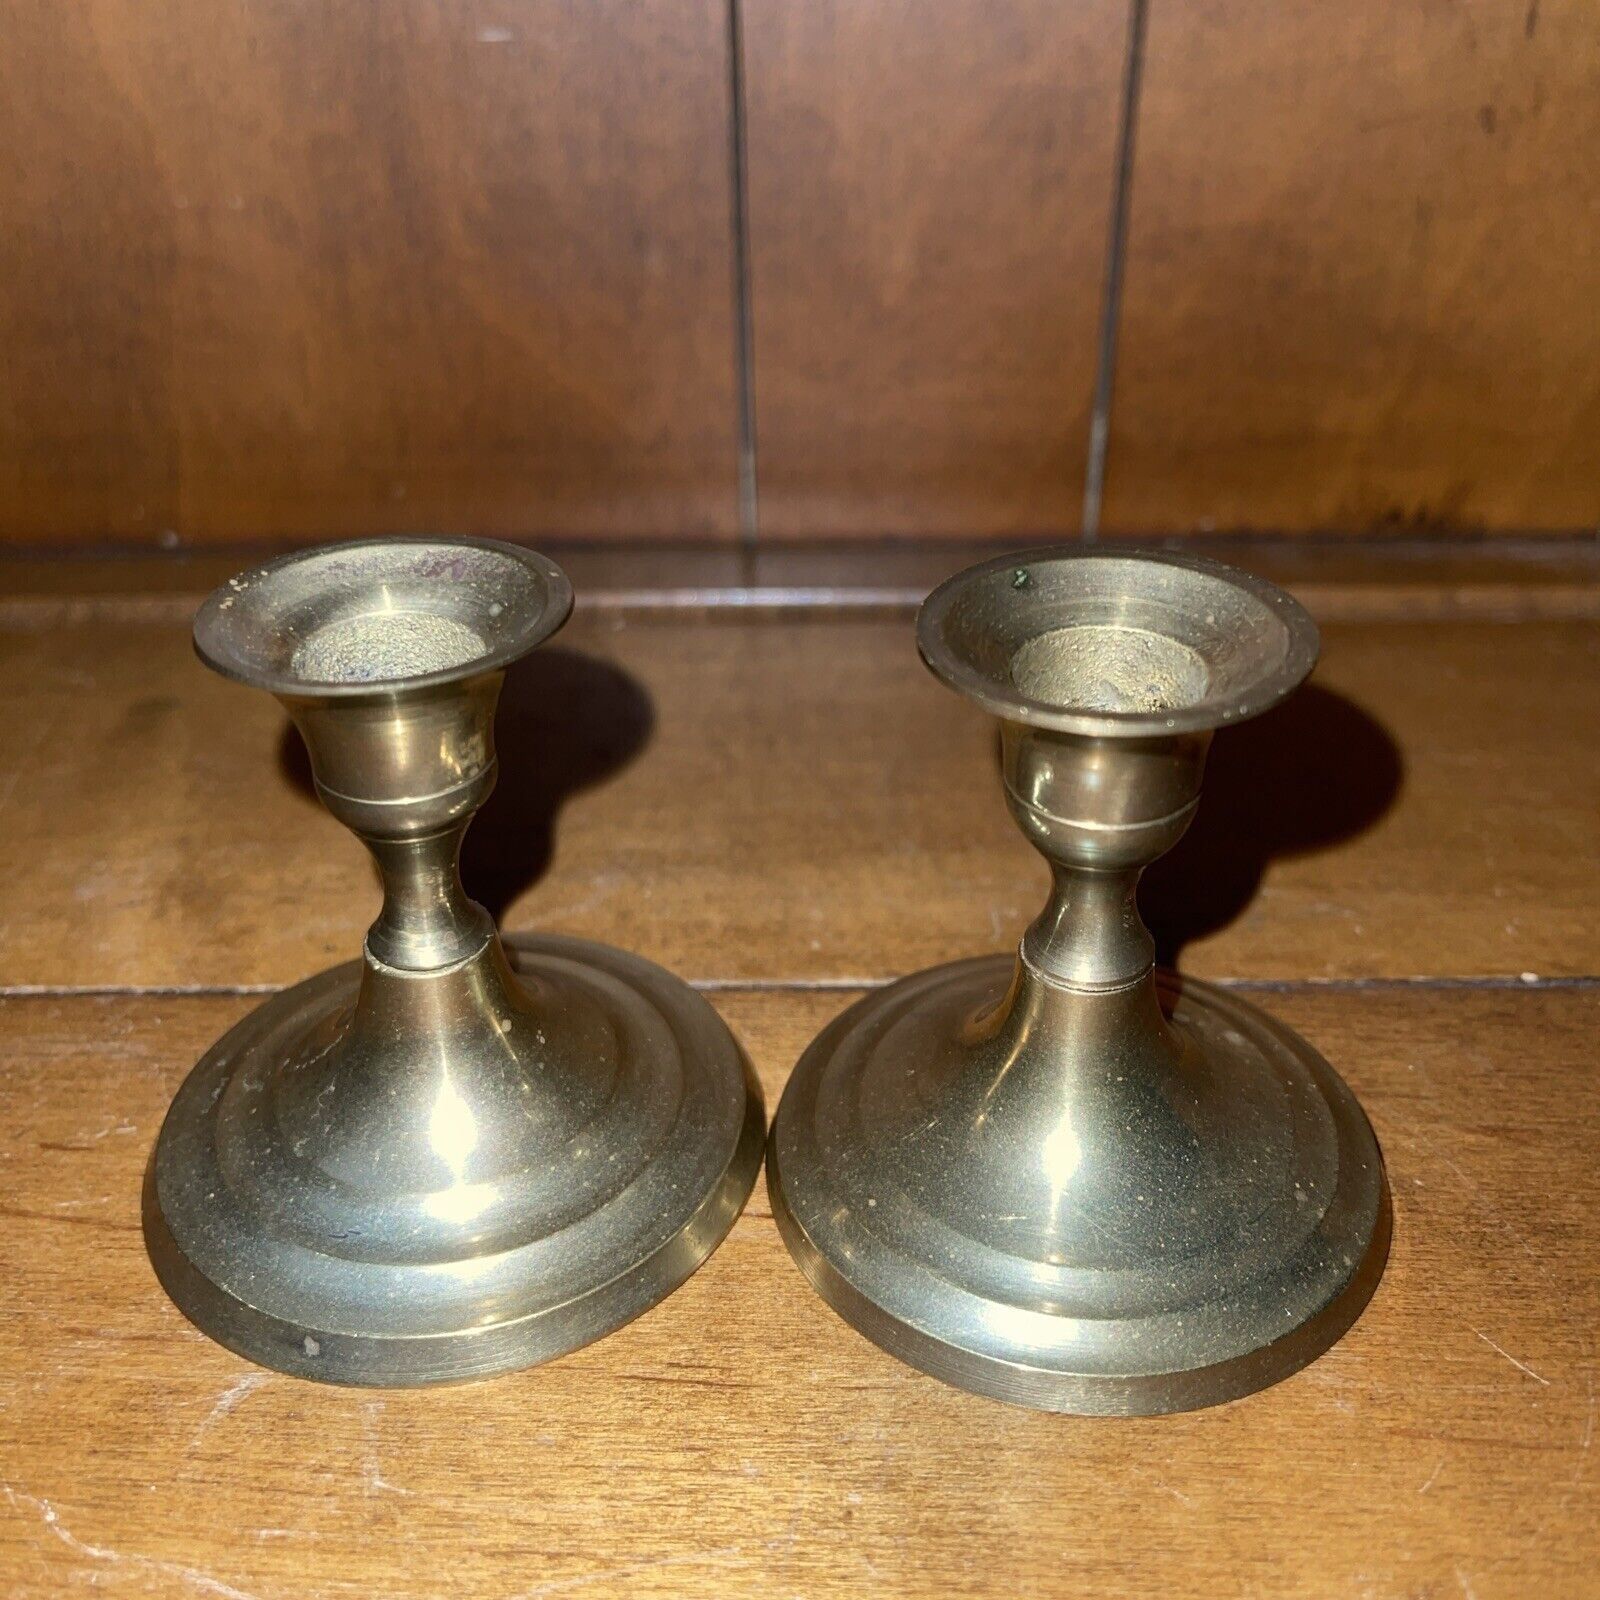 Pair of Vintage Brass Candlesticks, Candle Holders